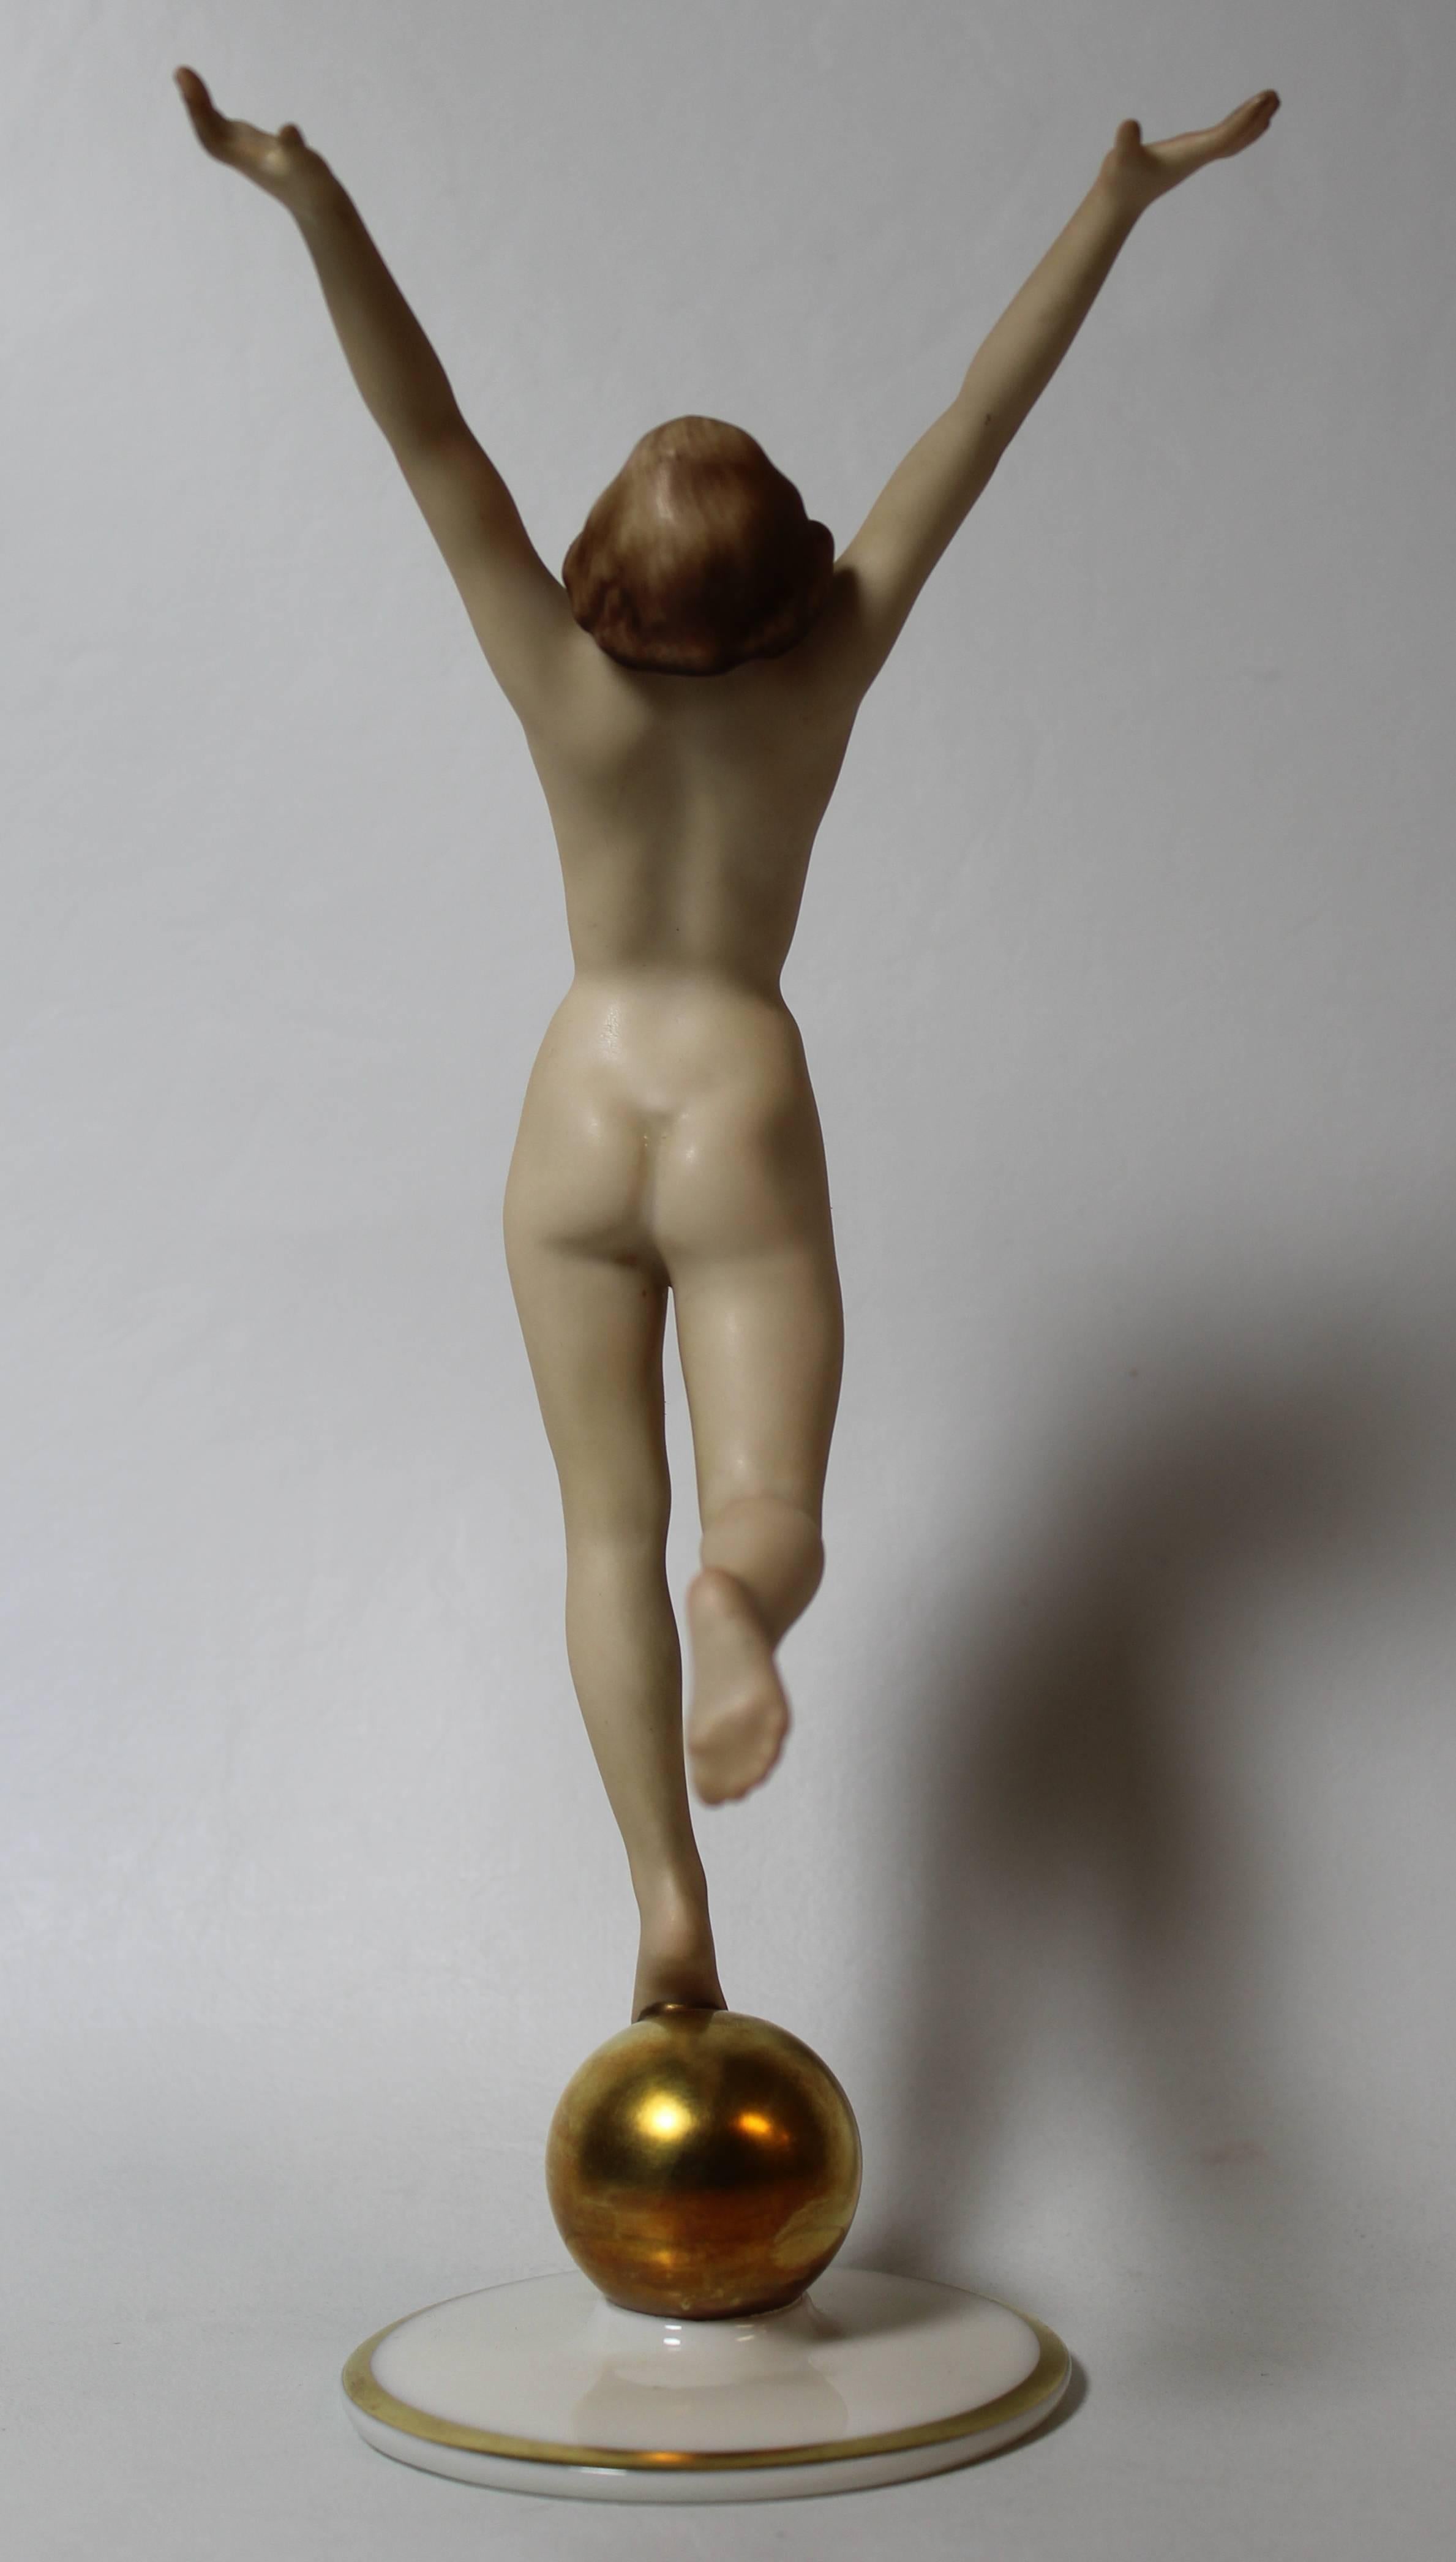 Karl Tutter for Hutschenreuther Porcelain Nude Figurine

Free shipping within the United States and Canada.